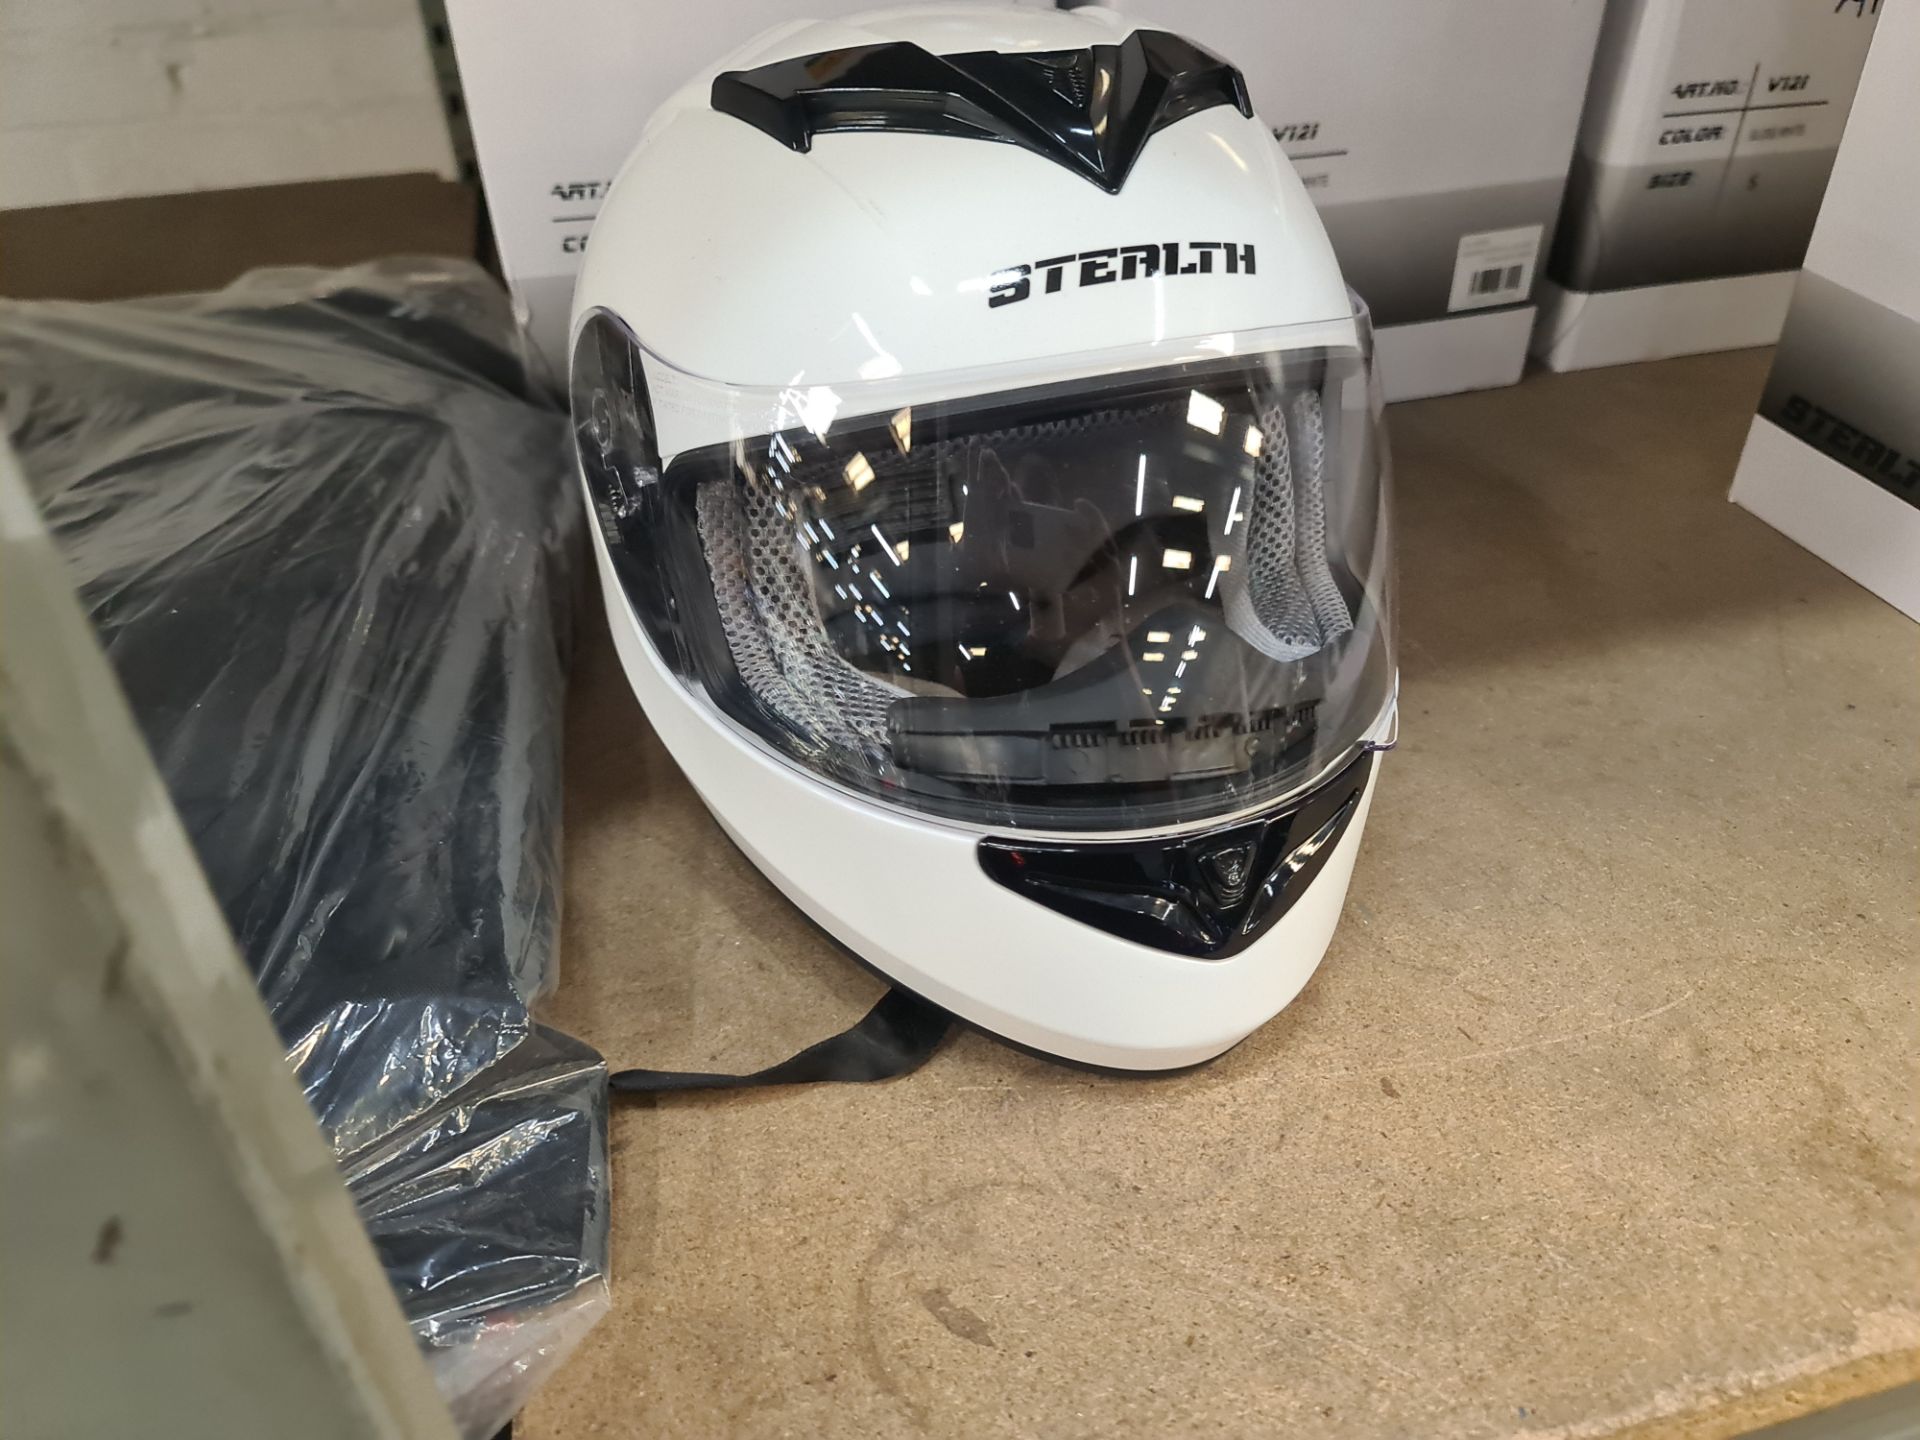 4 off Stealth V121 gloss white helmets - 1 each of S, M, L & XL - Image 5 of 8